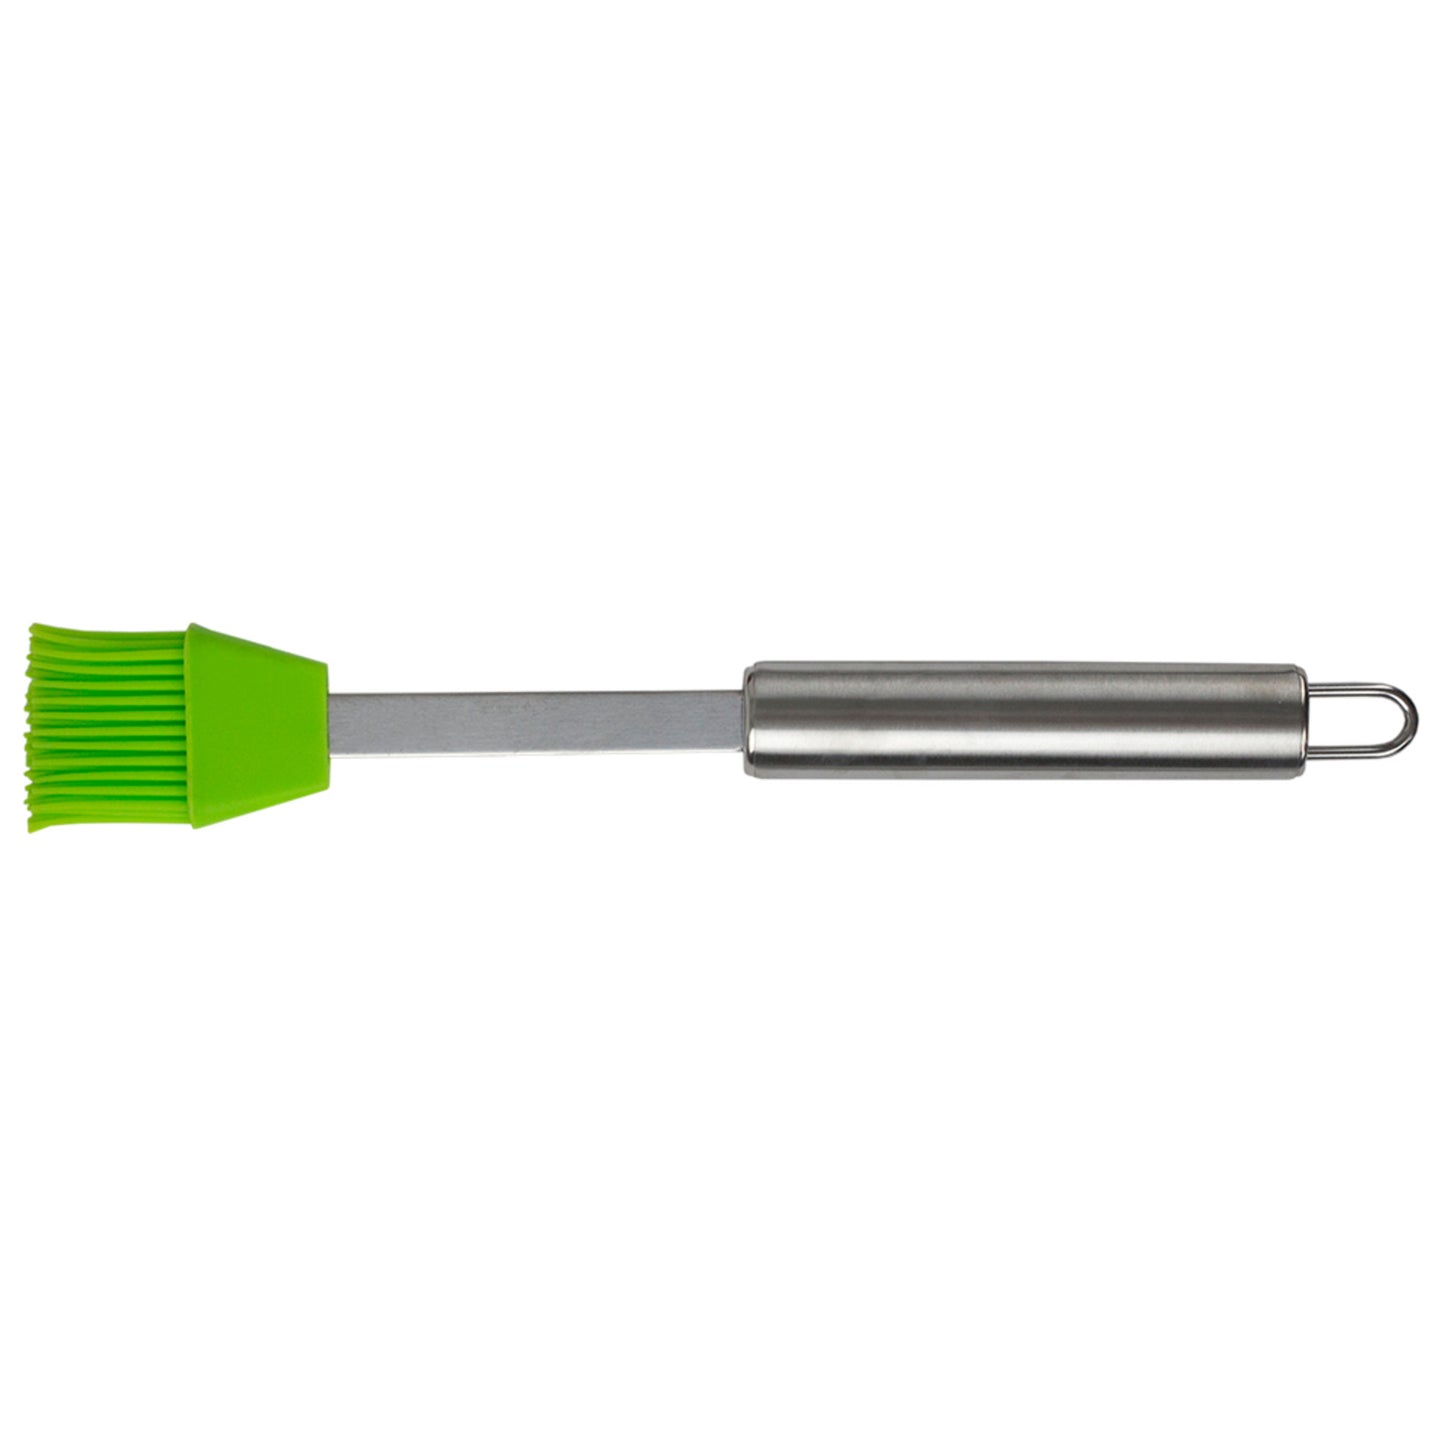 Home Basics Silicone Pastry Brush, Green - Green